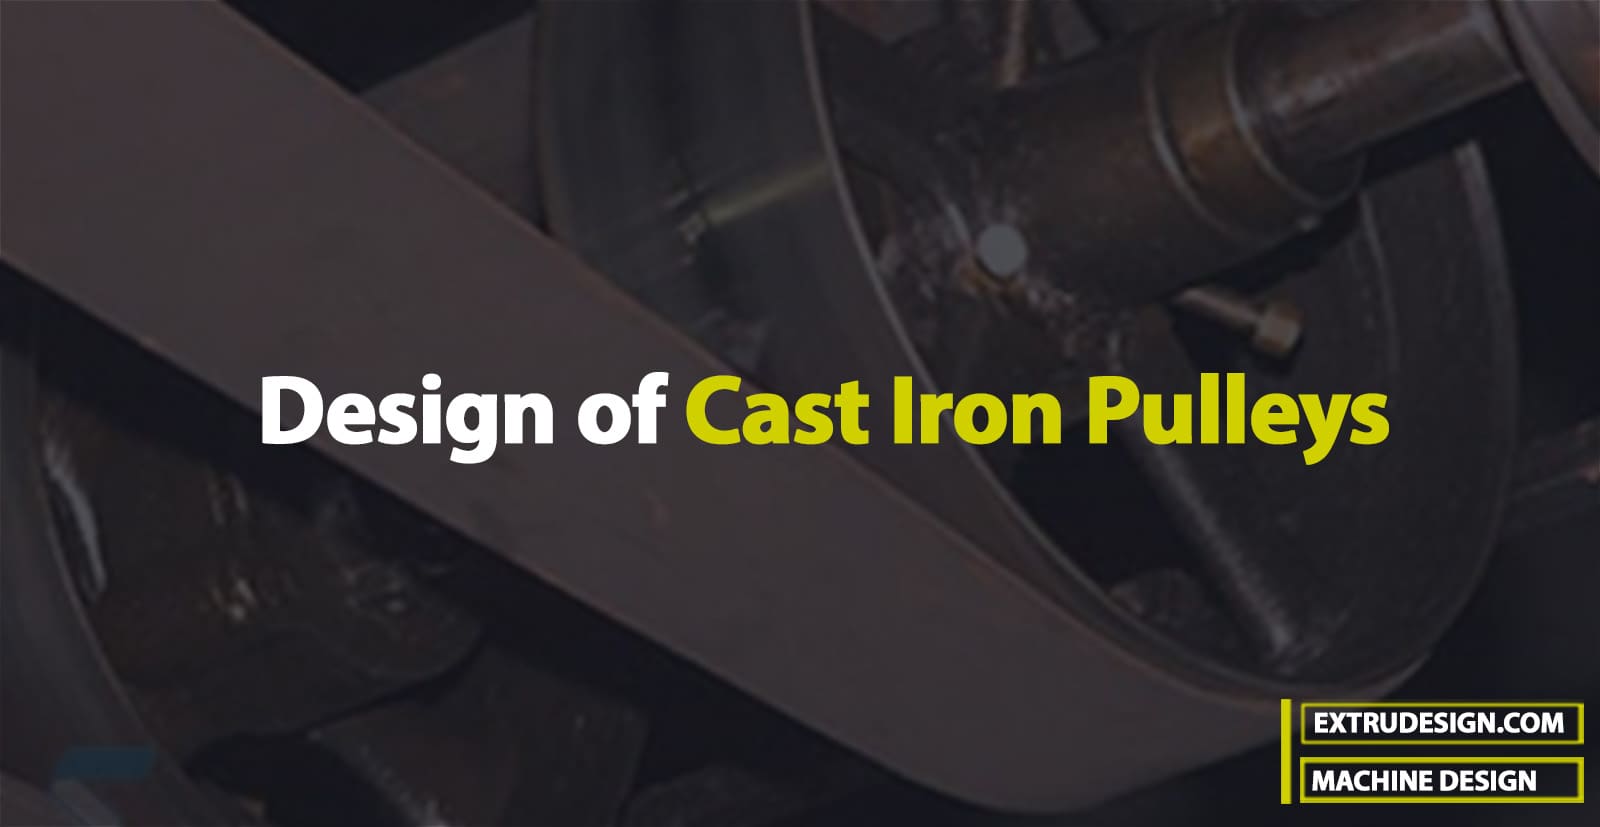 Design of Cast Iron Pulley